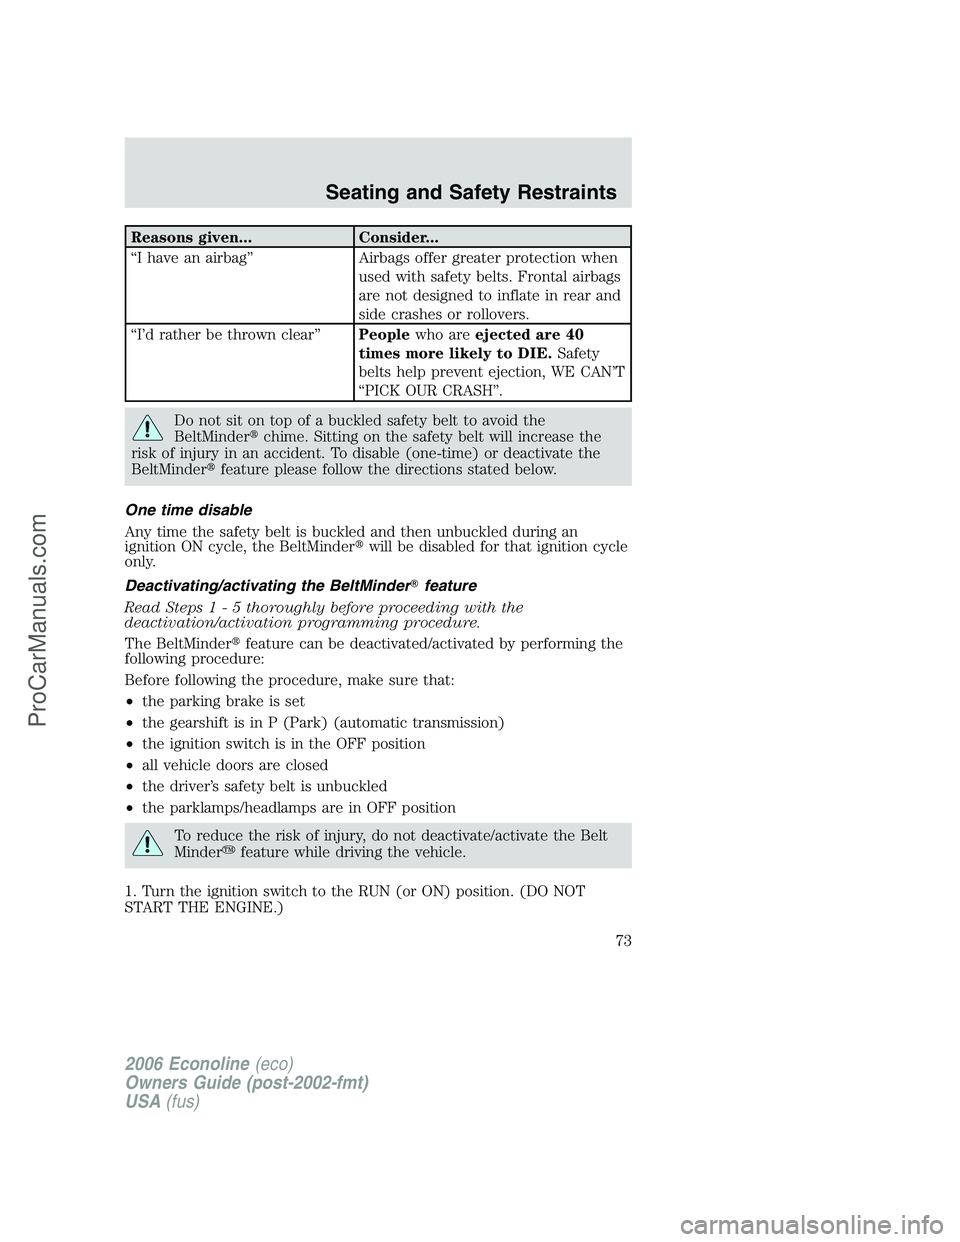 FORD E-150 2006 Manual PDF Reasons given... Consider...
“I have an airbag” Airbags offer greater protection when
used with safety belts. Frontal airbags
are not designed to inflate in rear and
side crashes or rollovers.
“